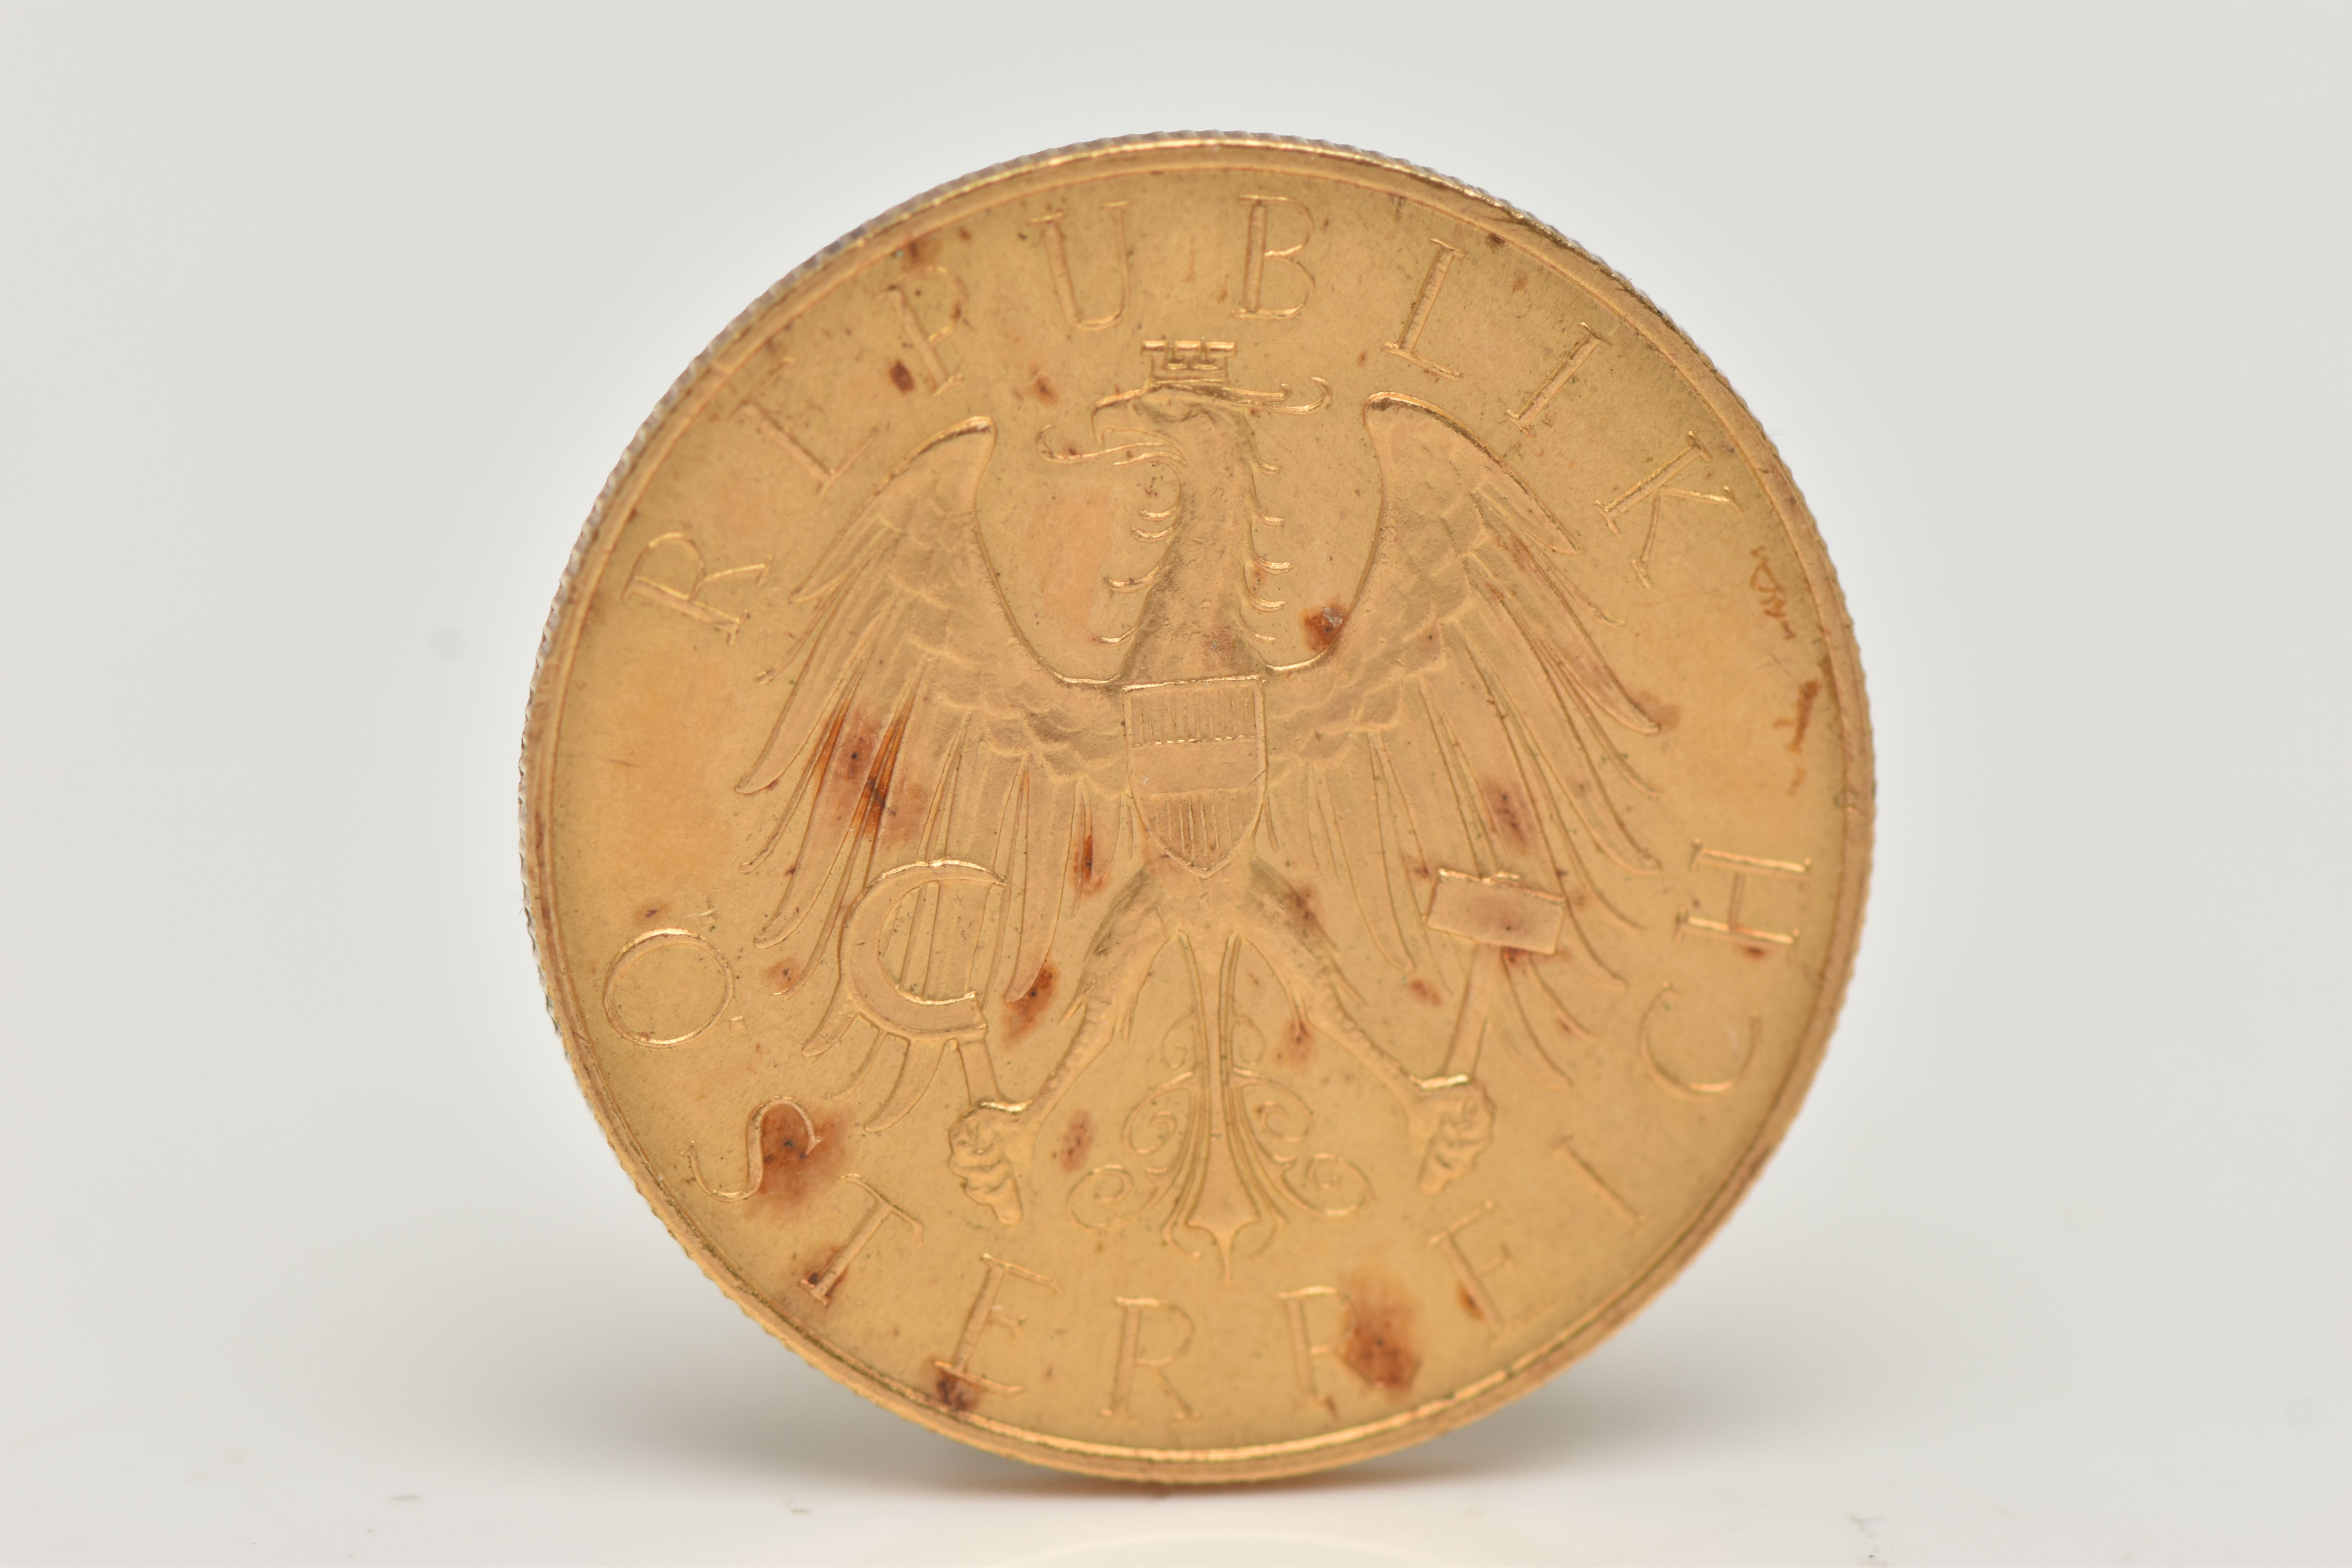 AUSTRIA GOLD 25 SCHILLING COIN 1929, 5.8 grams, 21mm, .900 fine, 243,269 mintage (some staining) - Image 2 of 2